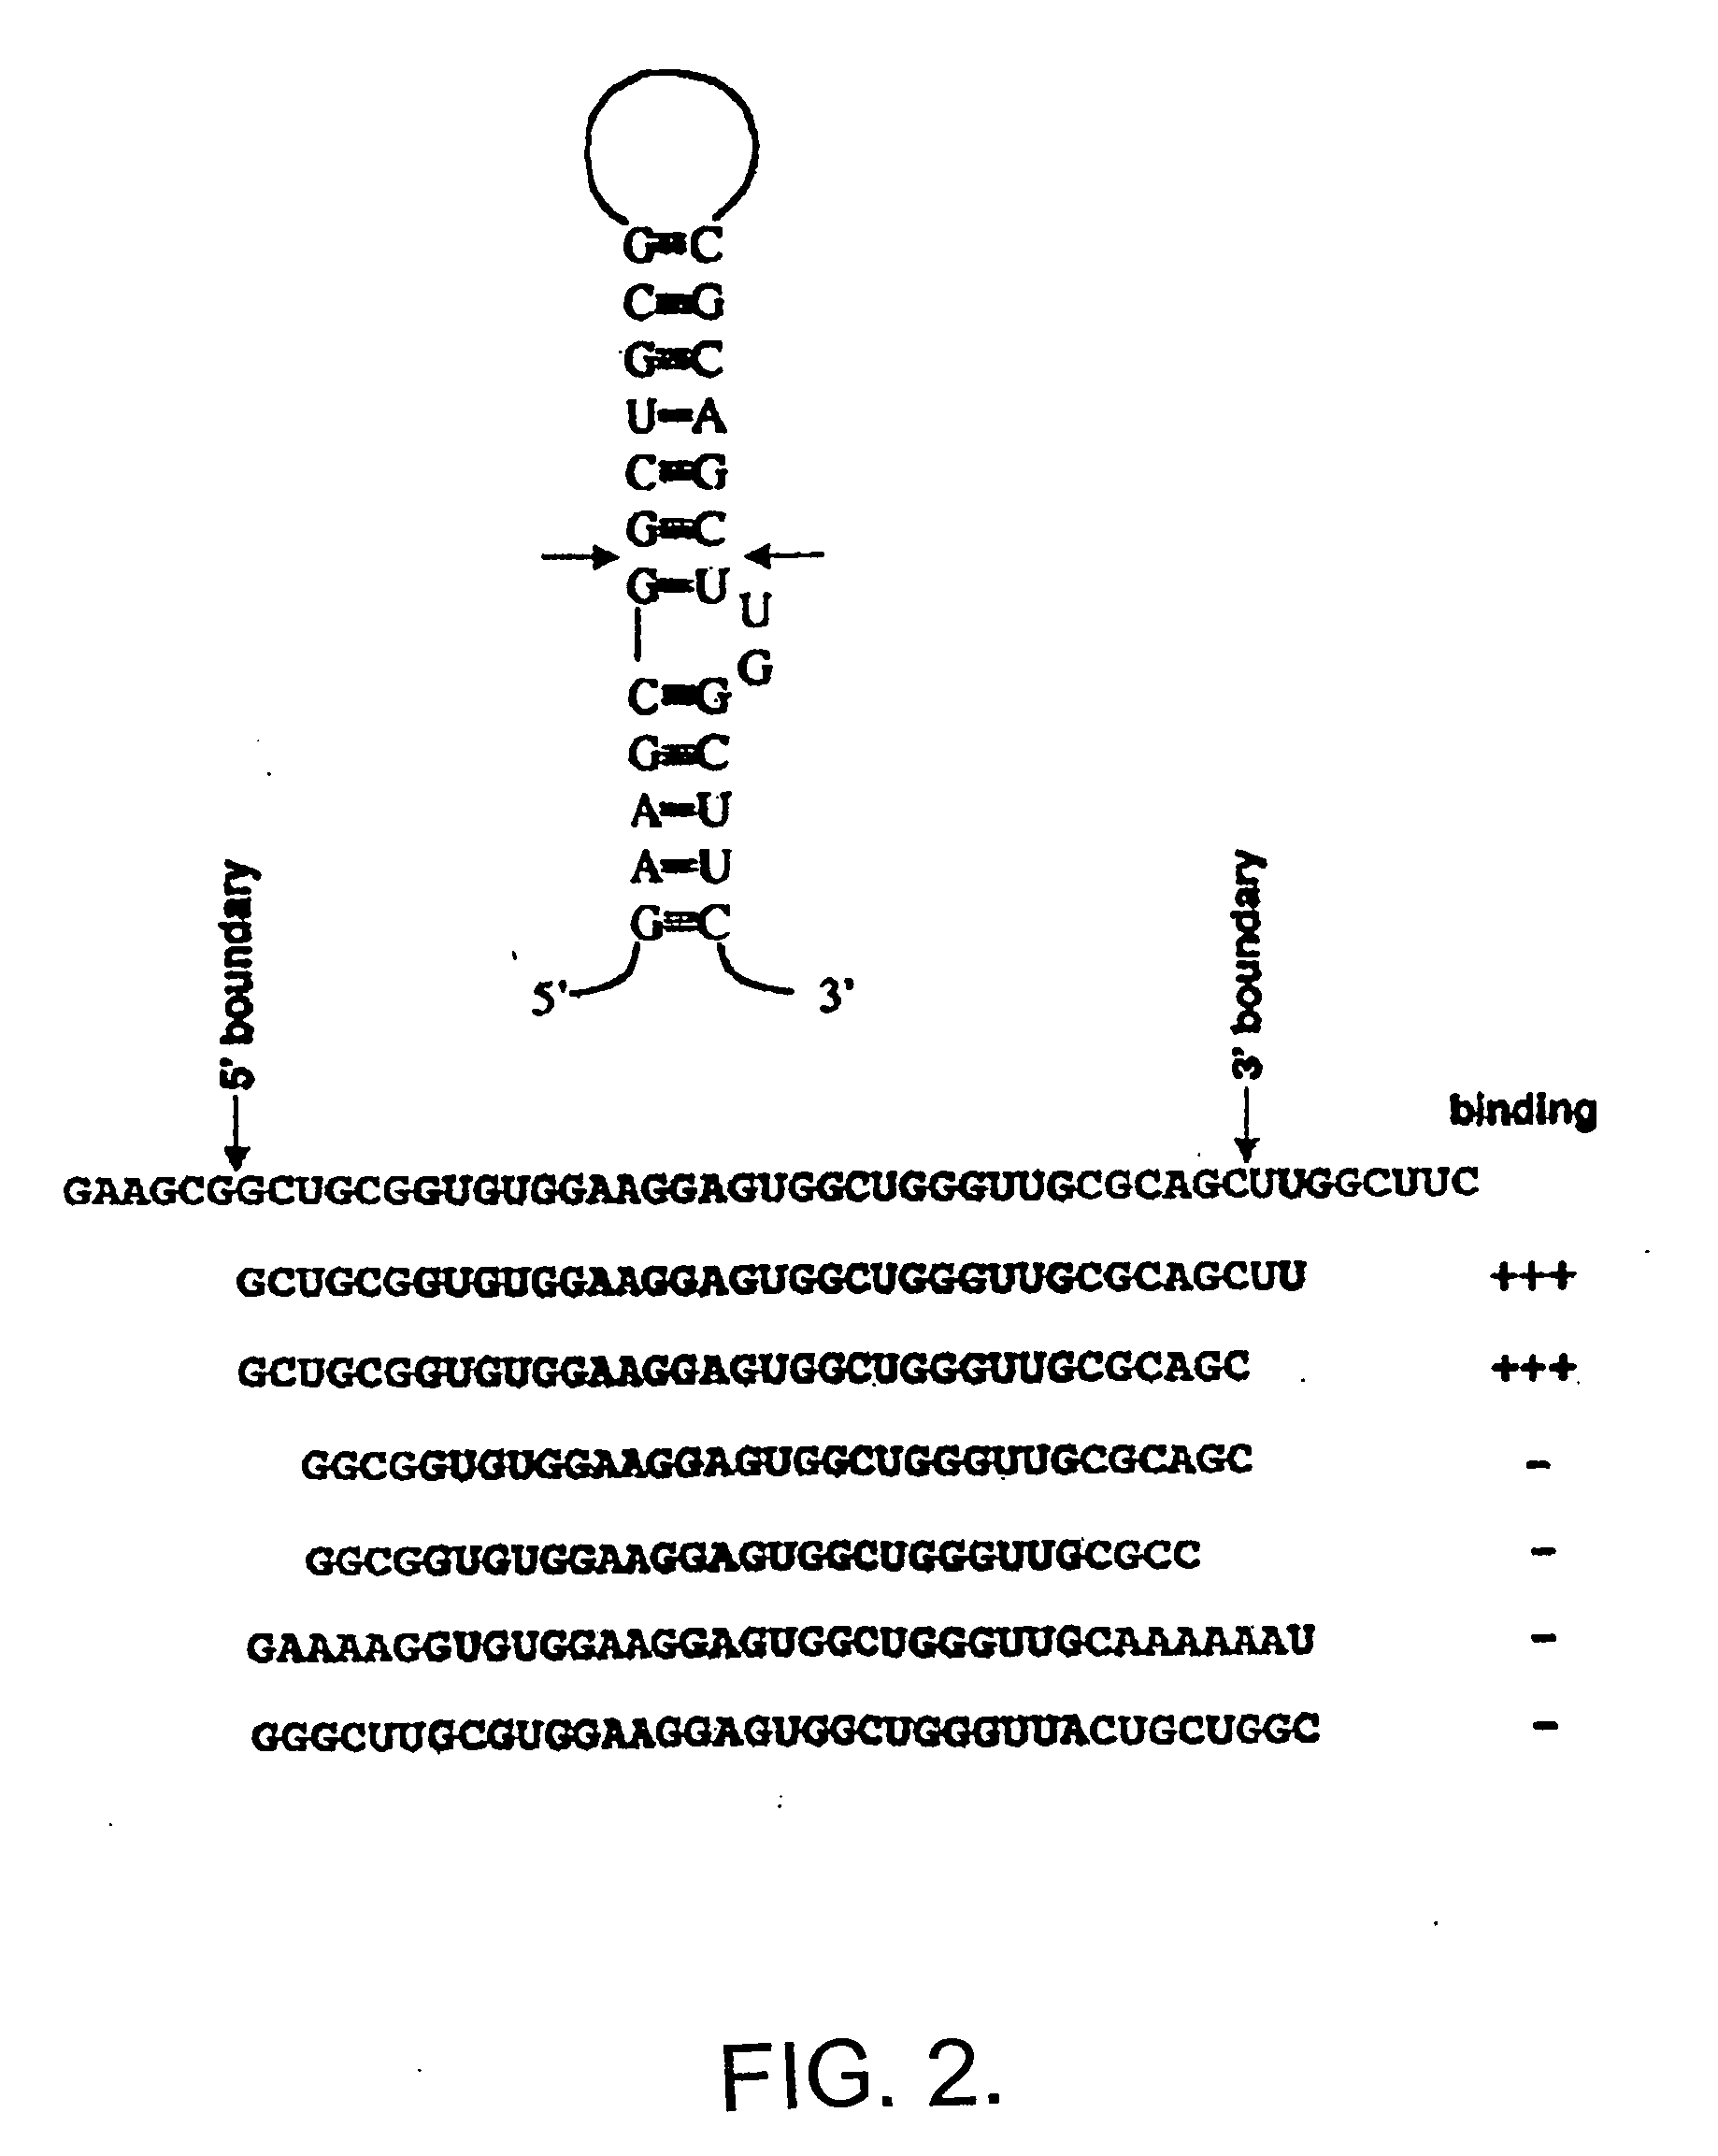 Method and identification of downstream mrna ligands to fmrp and their role in fragile x syndrome and associated disorders